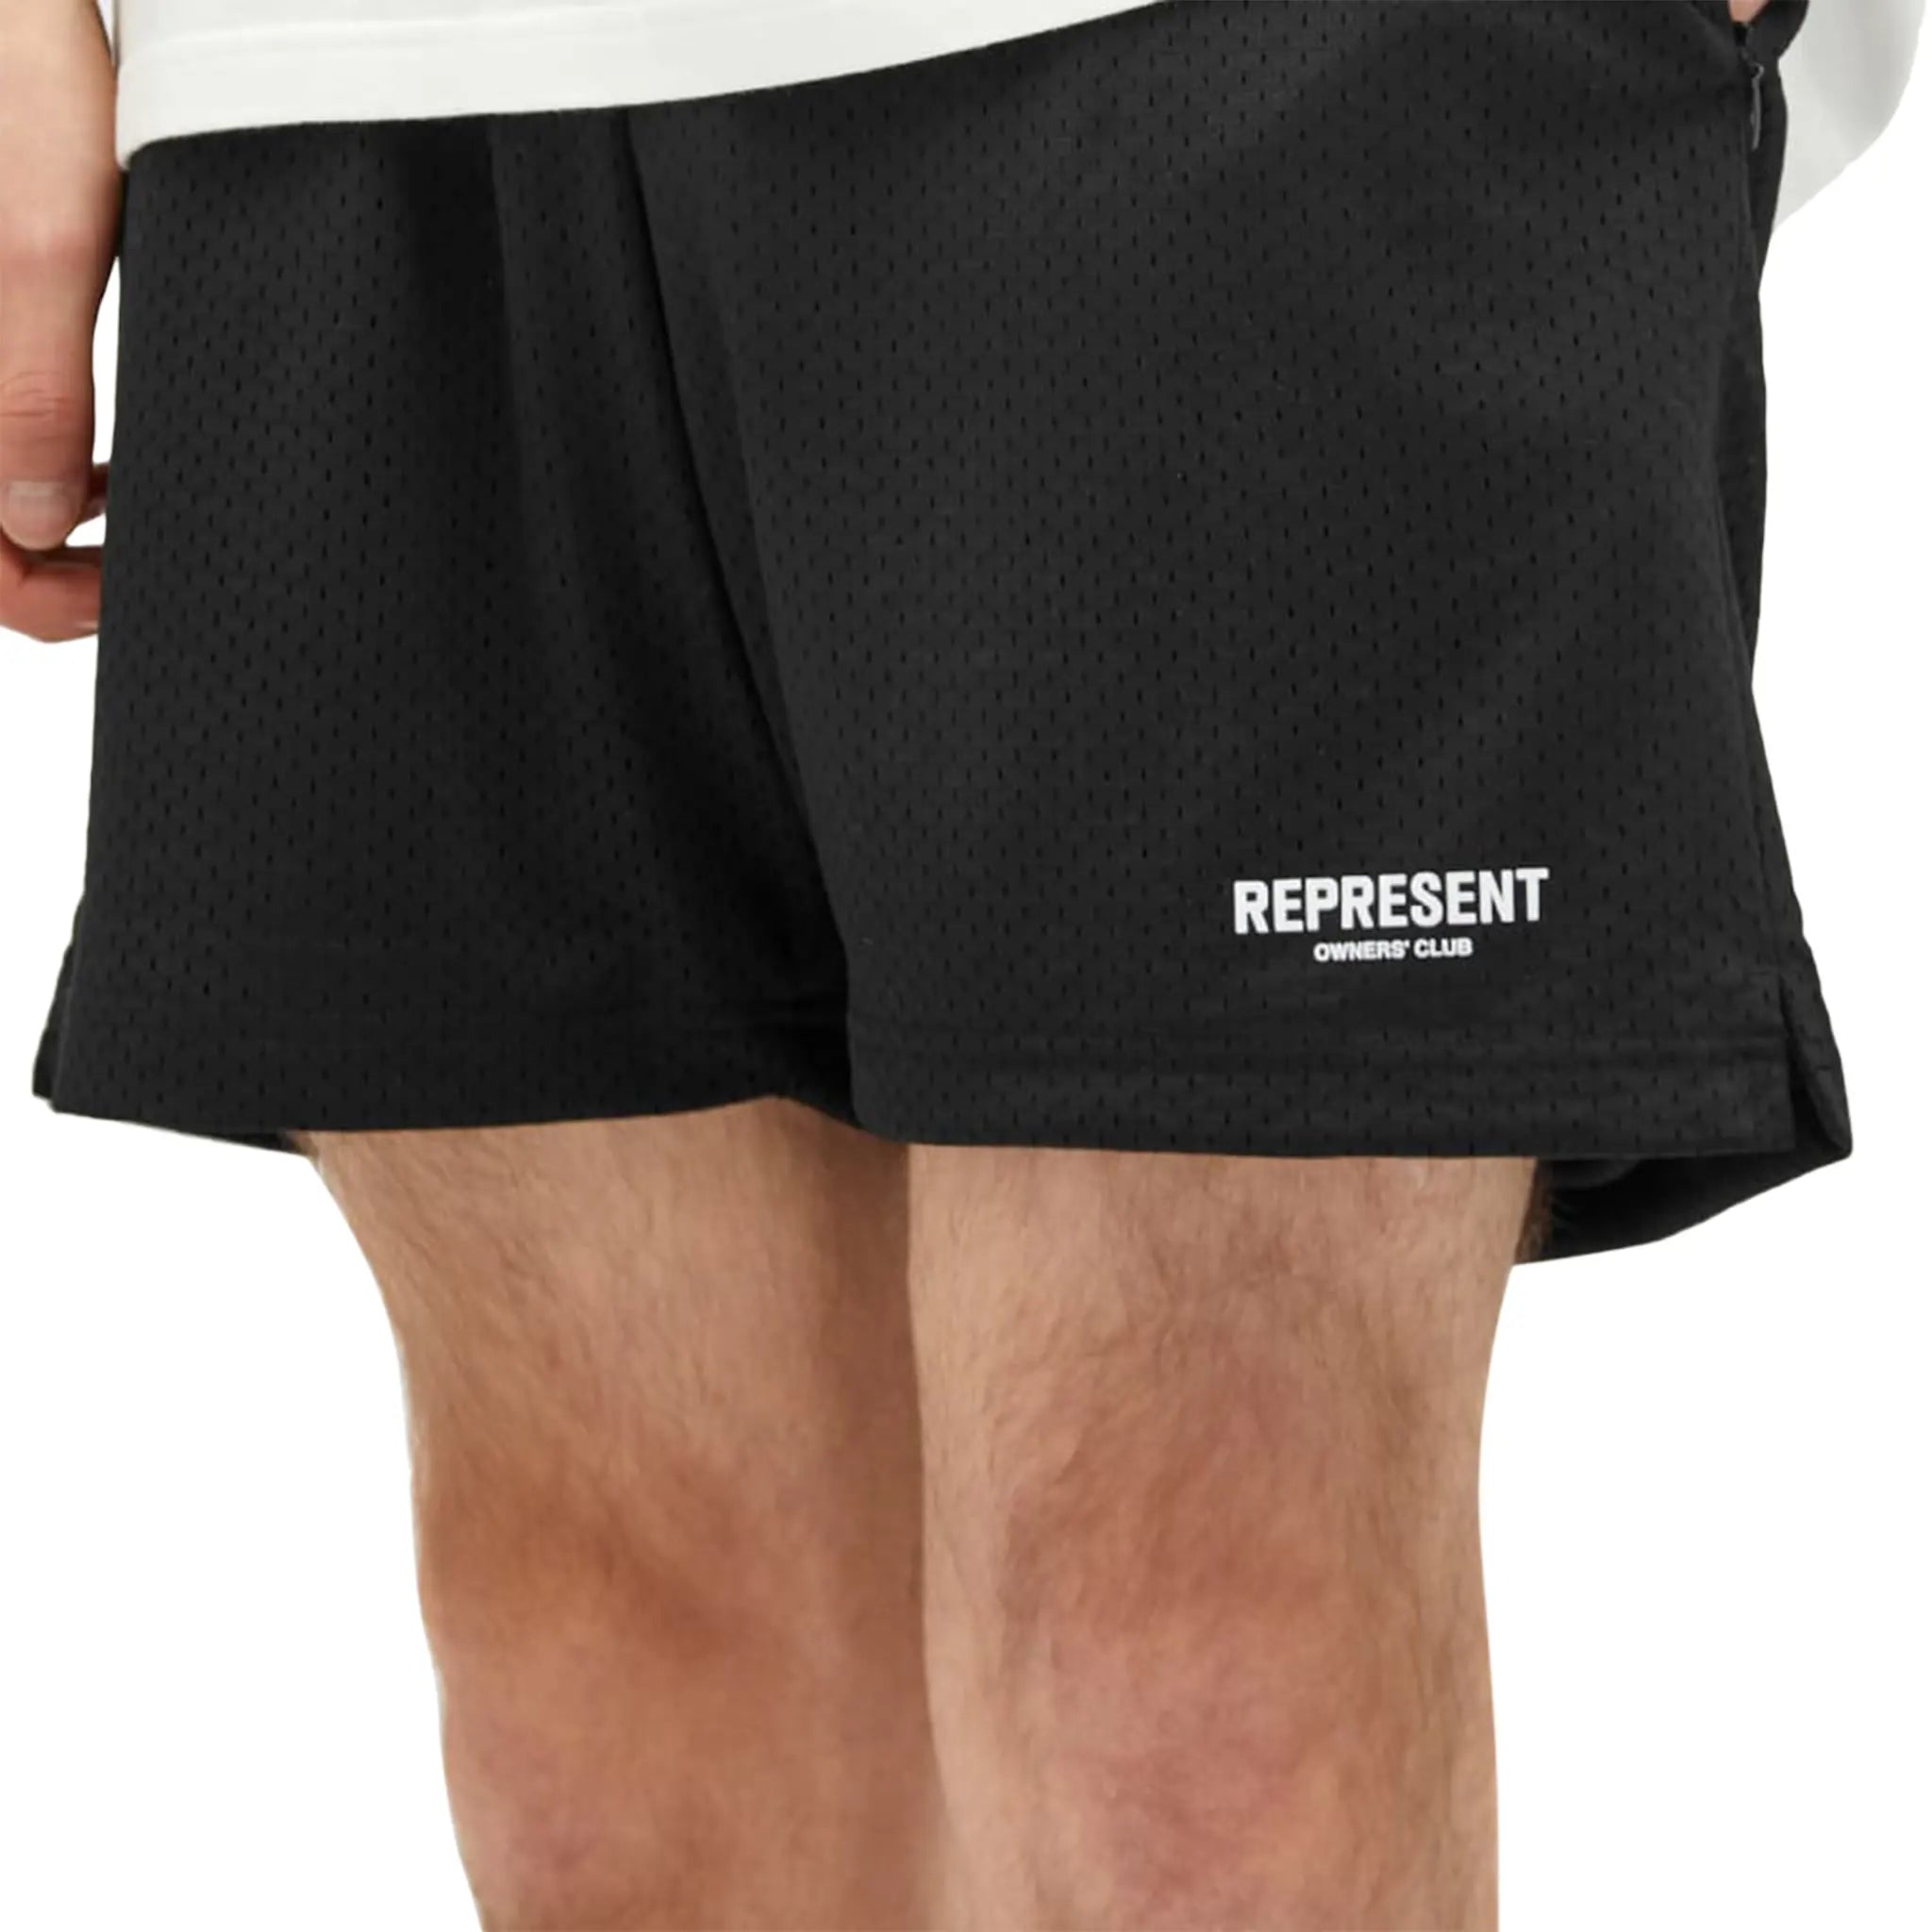 Detail view of represent owners club mesh black shorts m09050-01